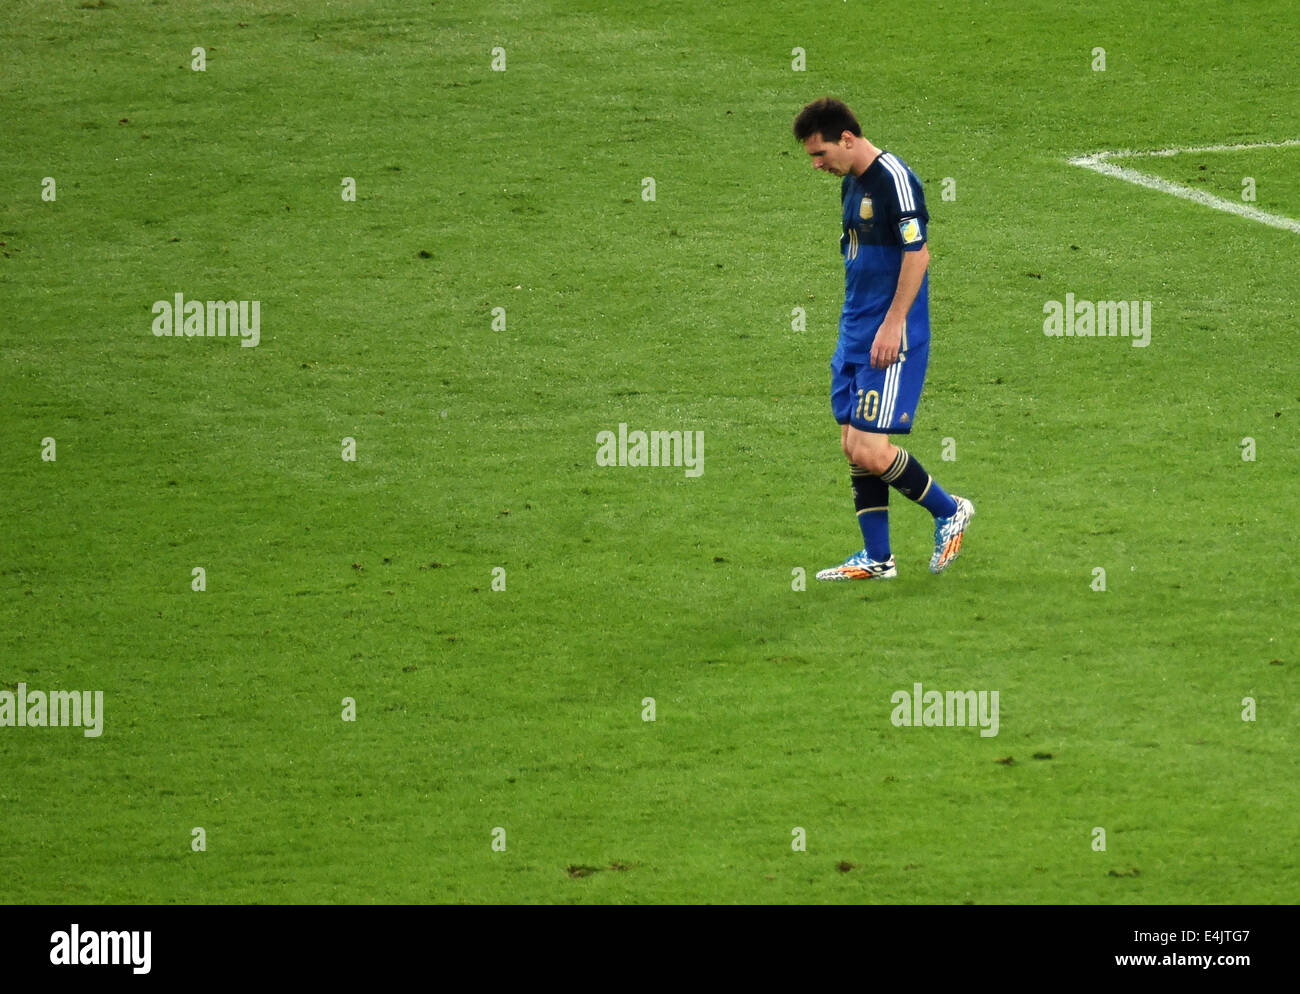 Rio de Janeiro, Brazil. 13th July, 2014. Lionel Messi of Argentina walks on the pitch during the FIFA World Cup 2014 final soccer match between Germany and Argentina at the Estadio do Maracana in Rio de Janeiro, Brazil, 13 July 2014. Photo: Thomas Eisenhuth/dpa/Alamy Live News Stock Photo